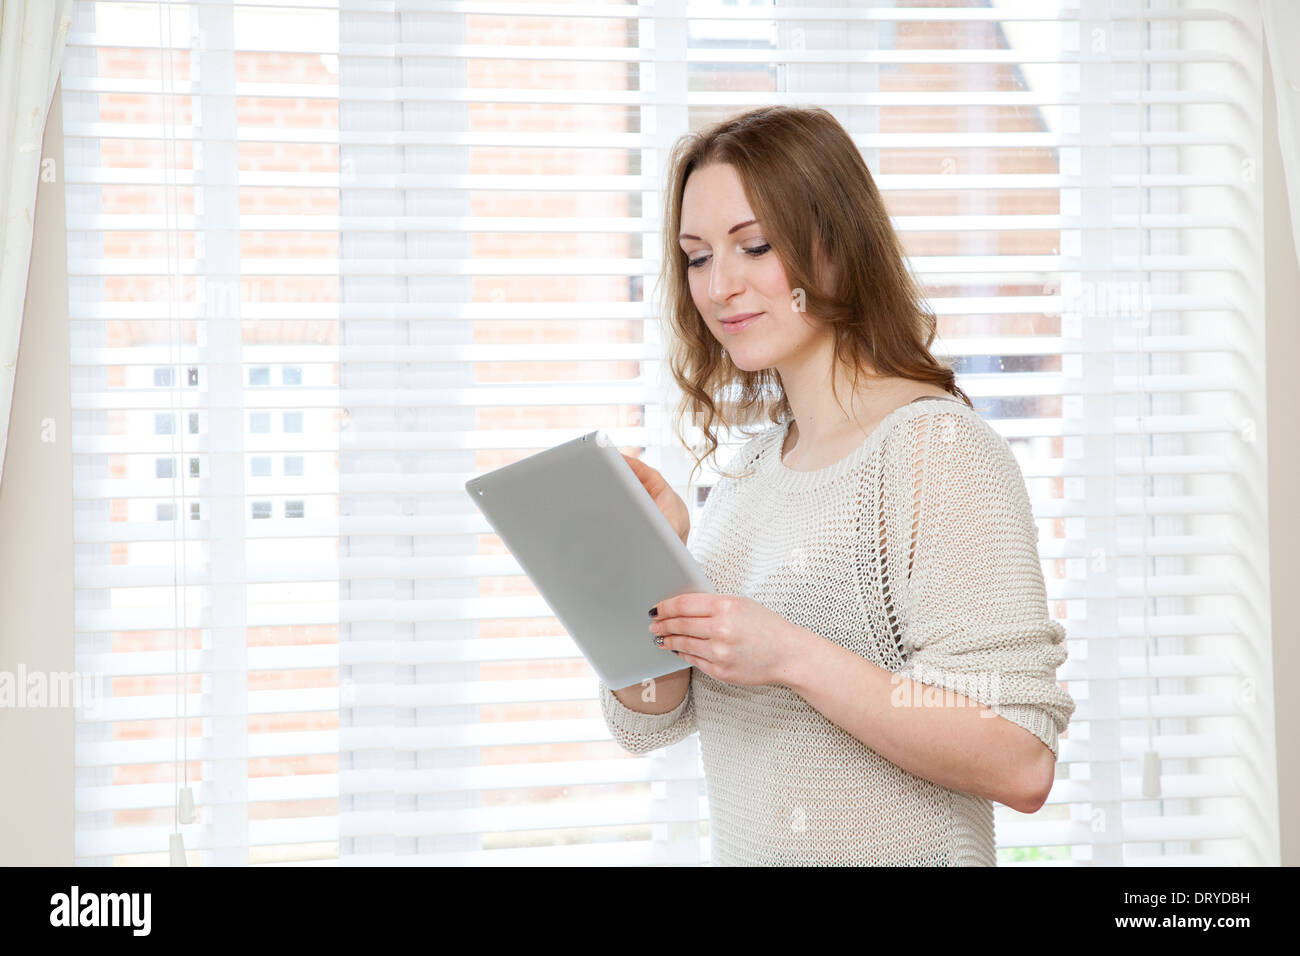 Young attractive woman holding a digital tablet (Ipad), by white window blinds. Stock Photo